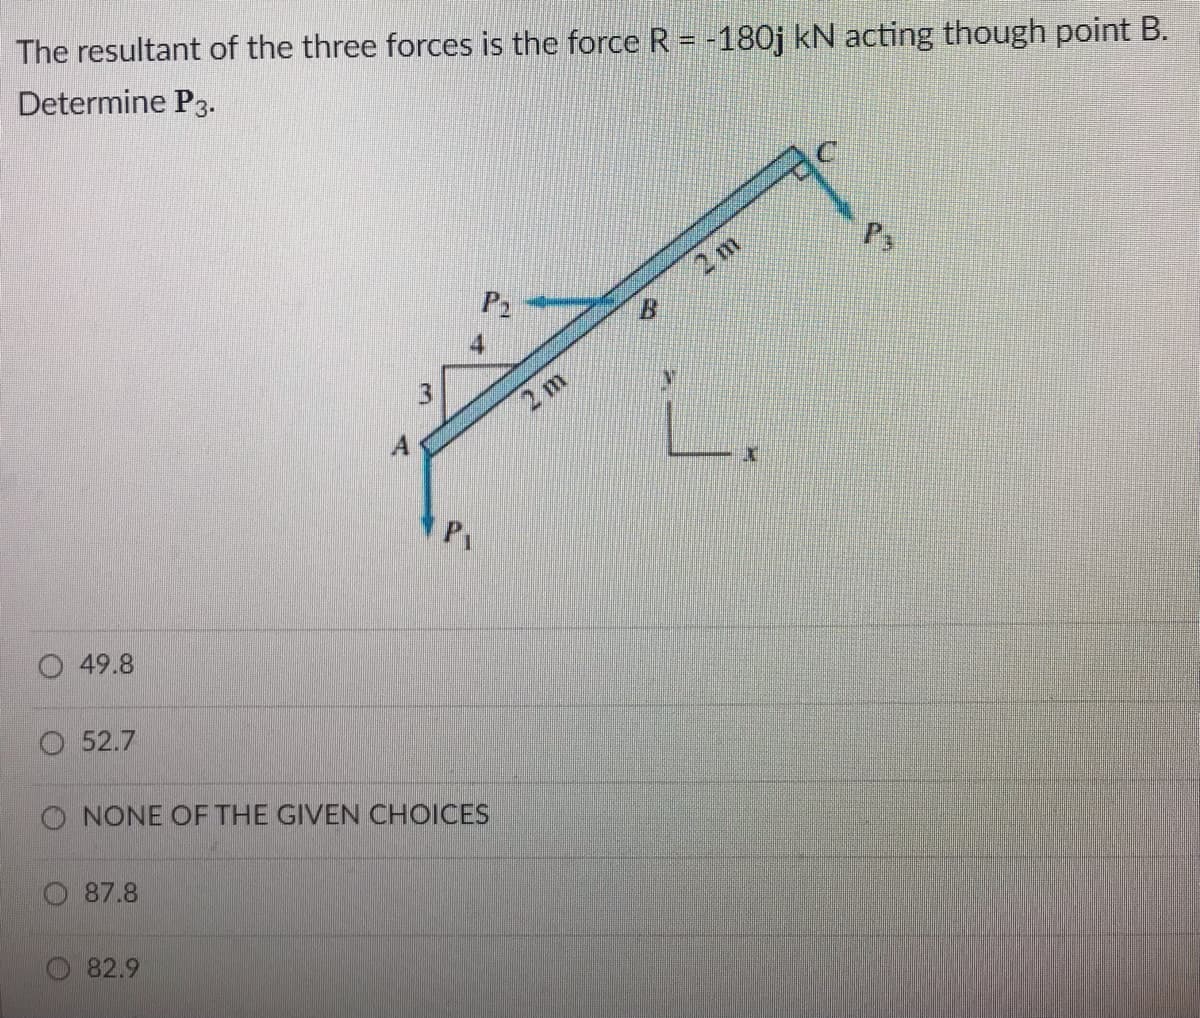 The resultant of the three forces is the force R = -180j kN acting though point B.
Determine P3.
2 m
2 m
A
O 49.8
O 52.7
O NONE OF THE GIVEN CHOICES
87.8
82.9
